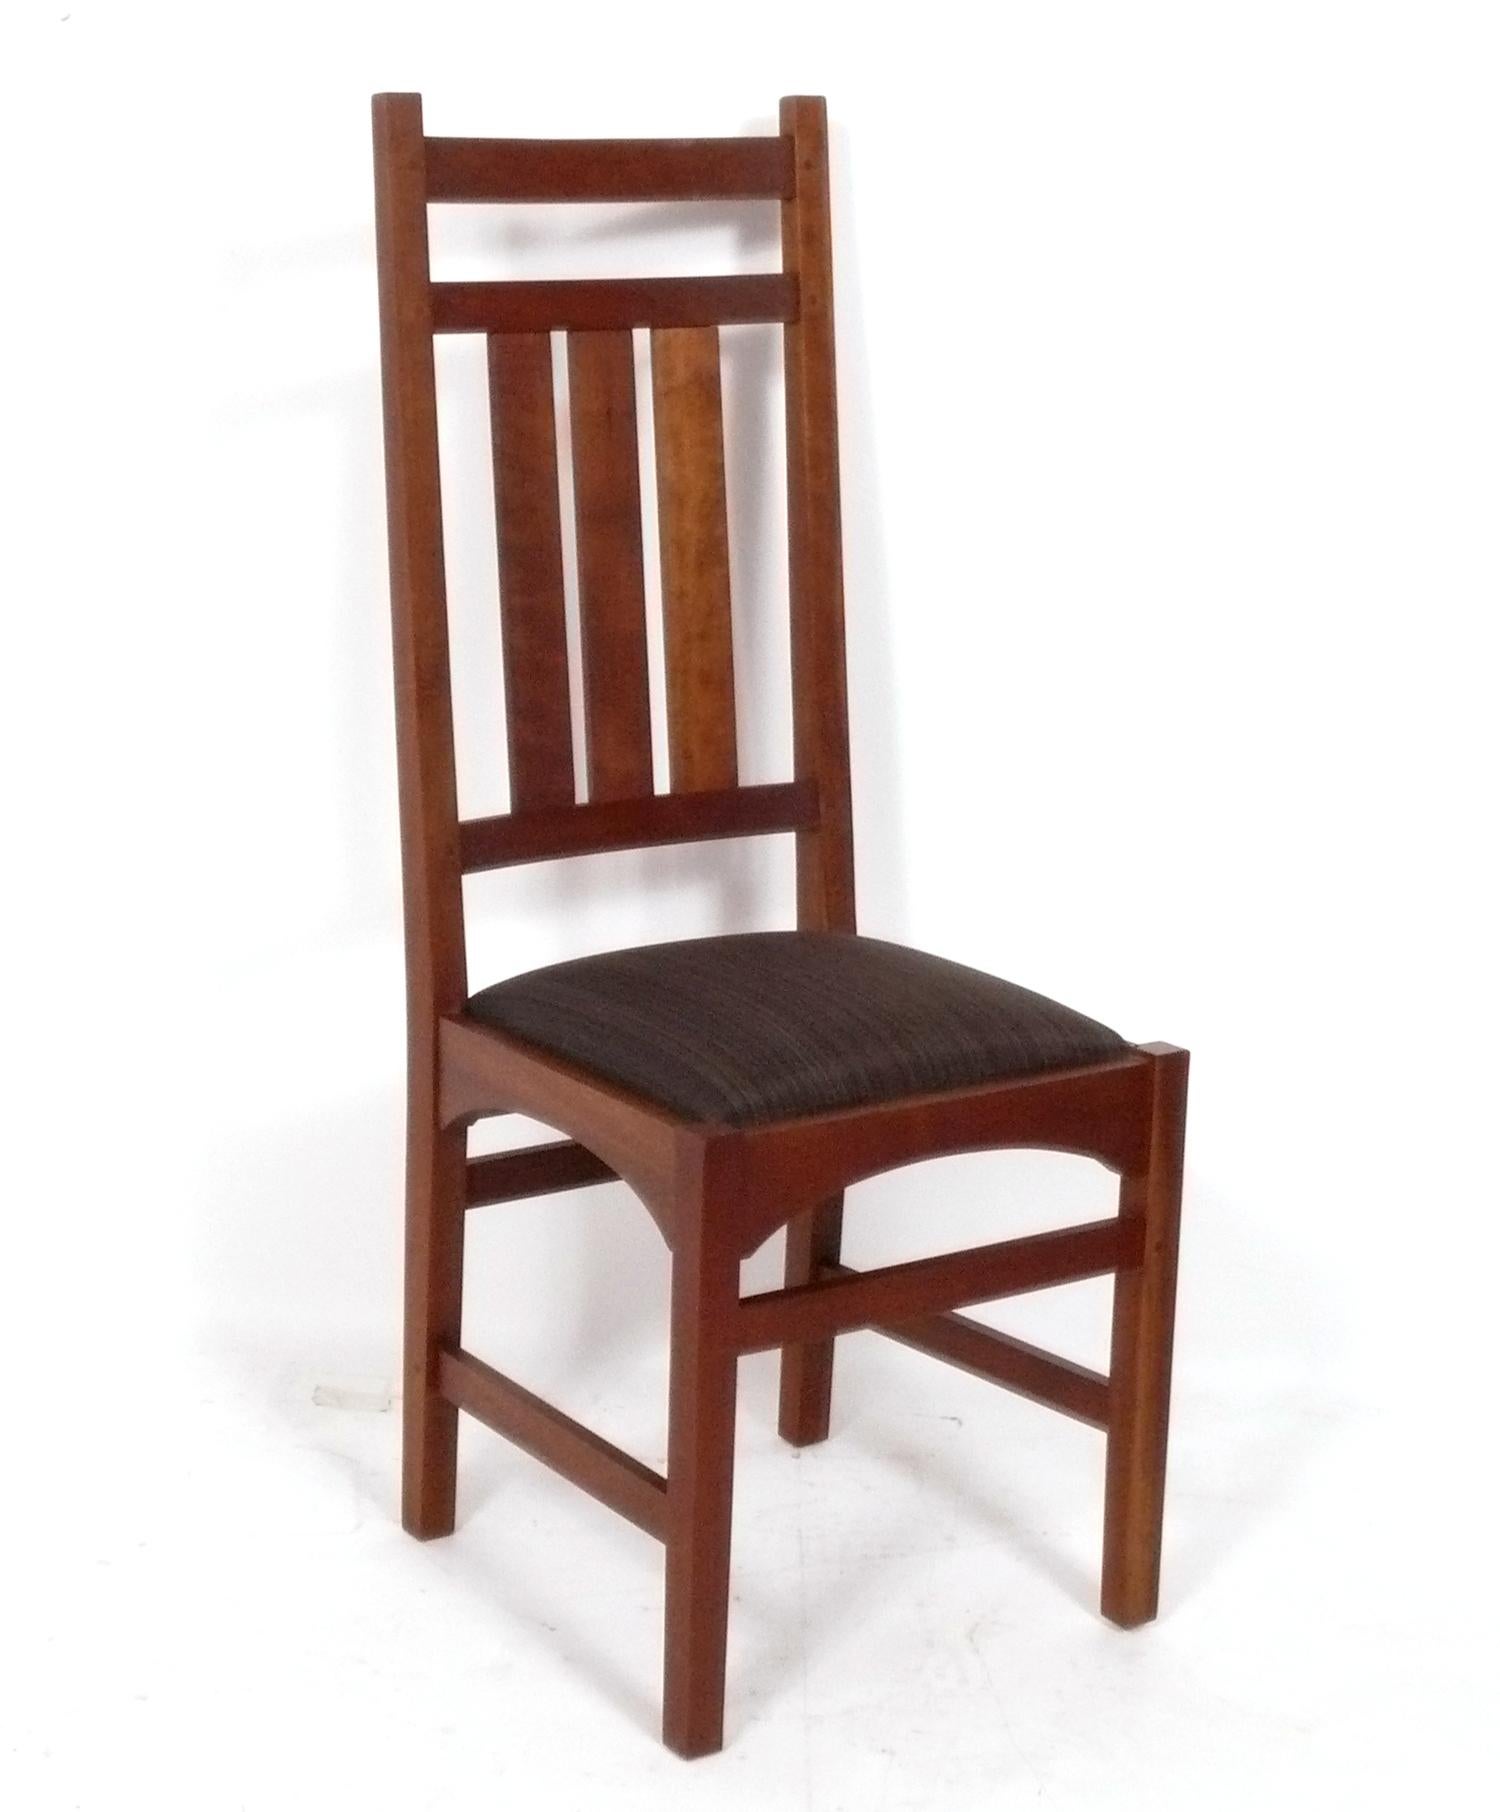 Clean Lined Mission Dining Chairs, designed by Harvey Ellis for the Stickley Company, American, circa 2000s. Set of six dining chairs.